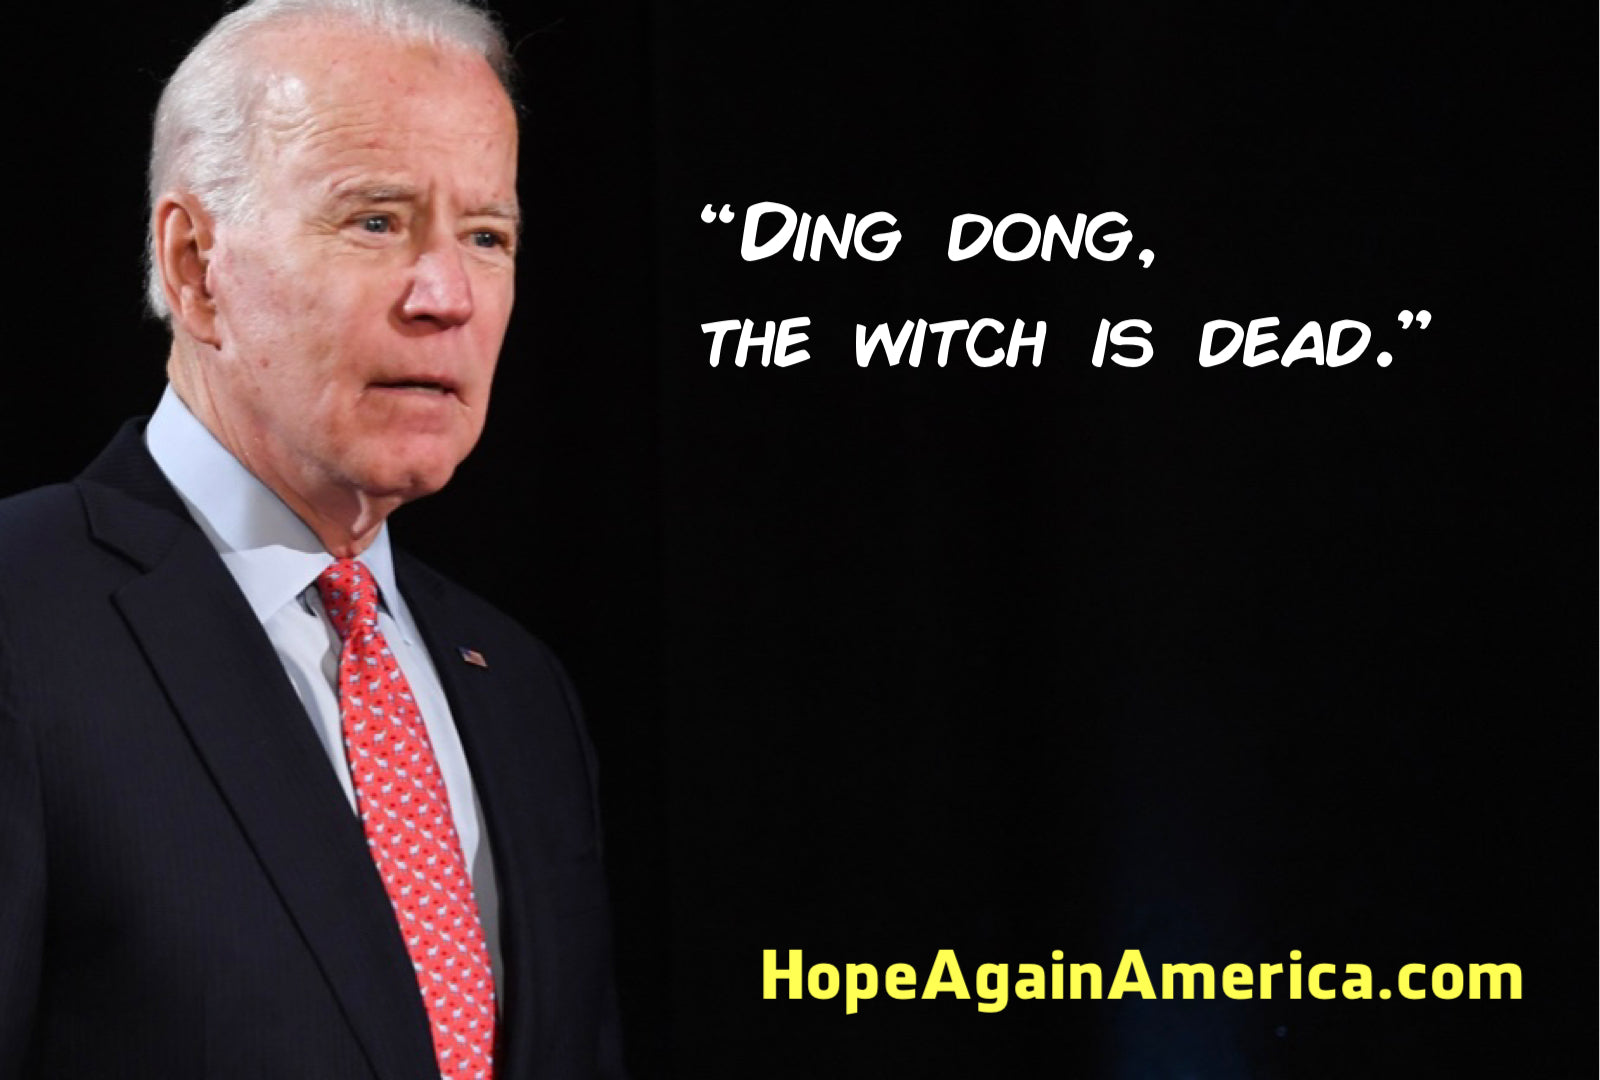 Ding Dong, The Witch Is Dead.